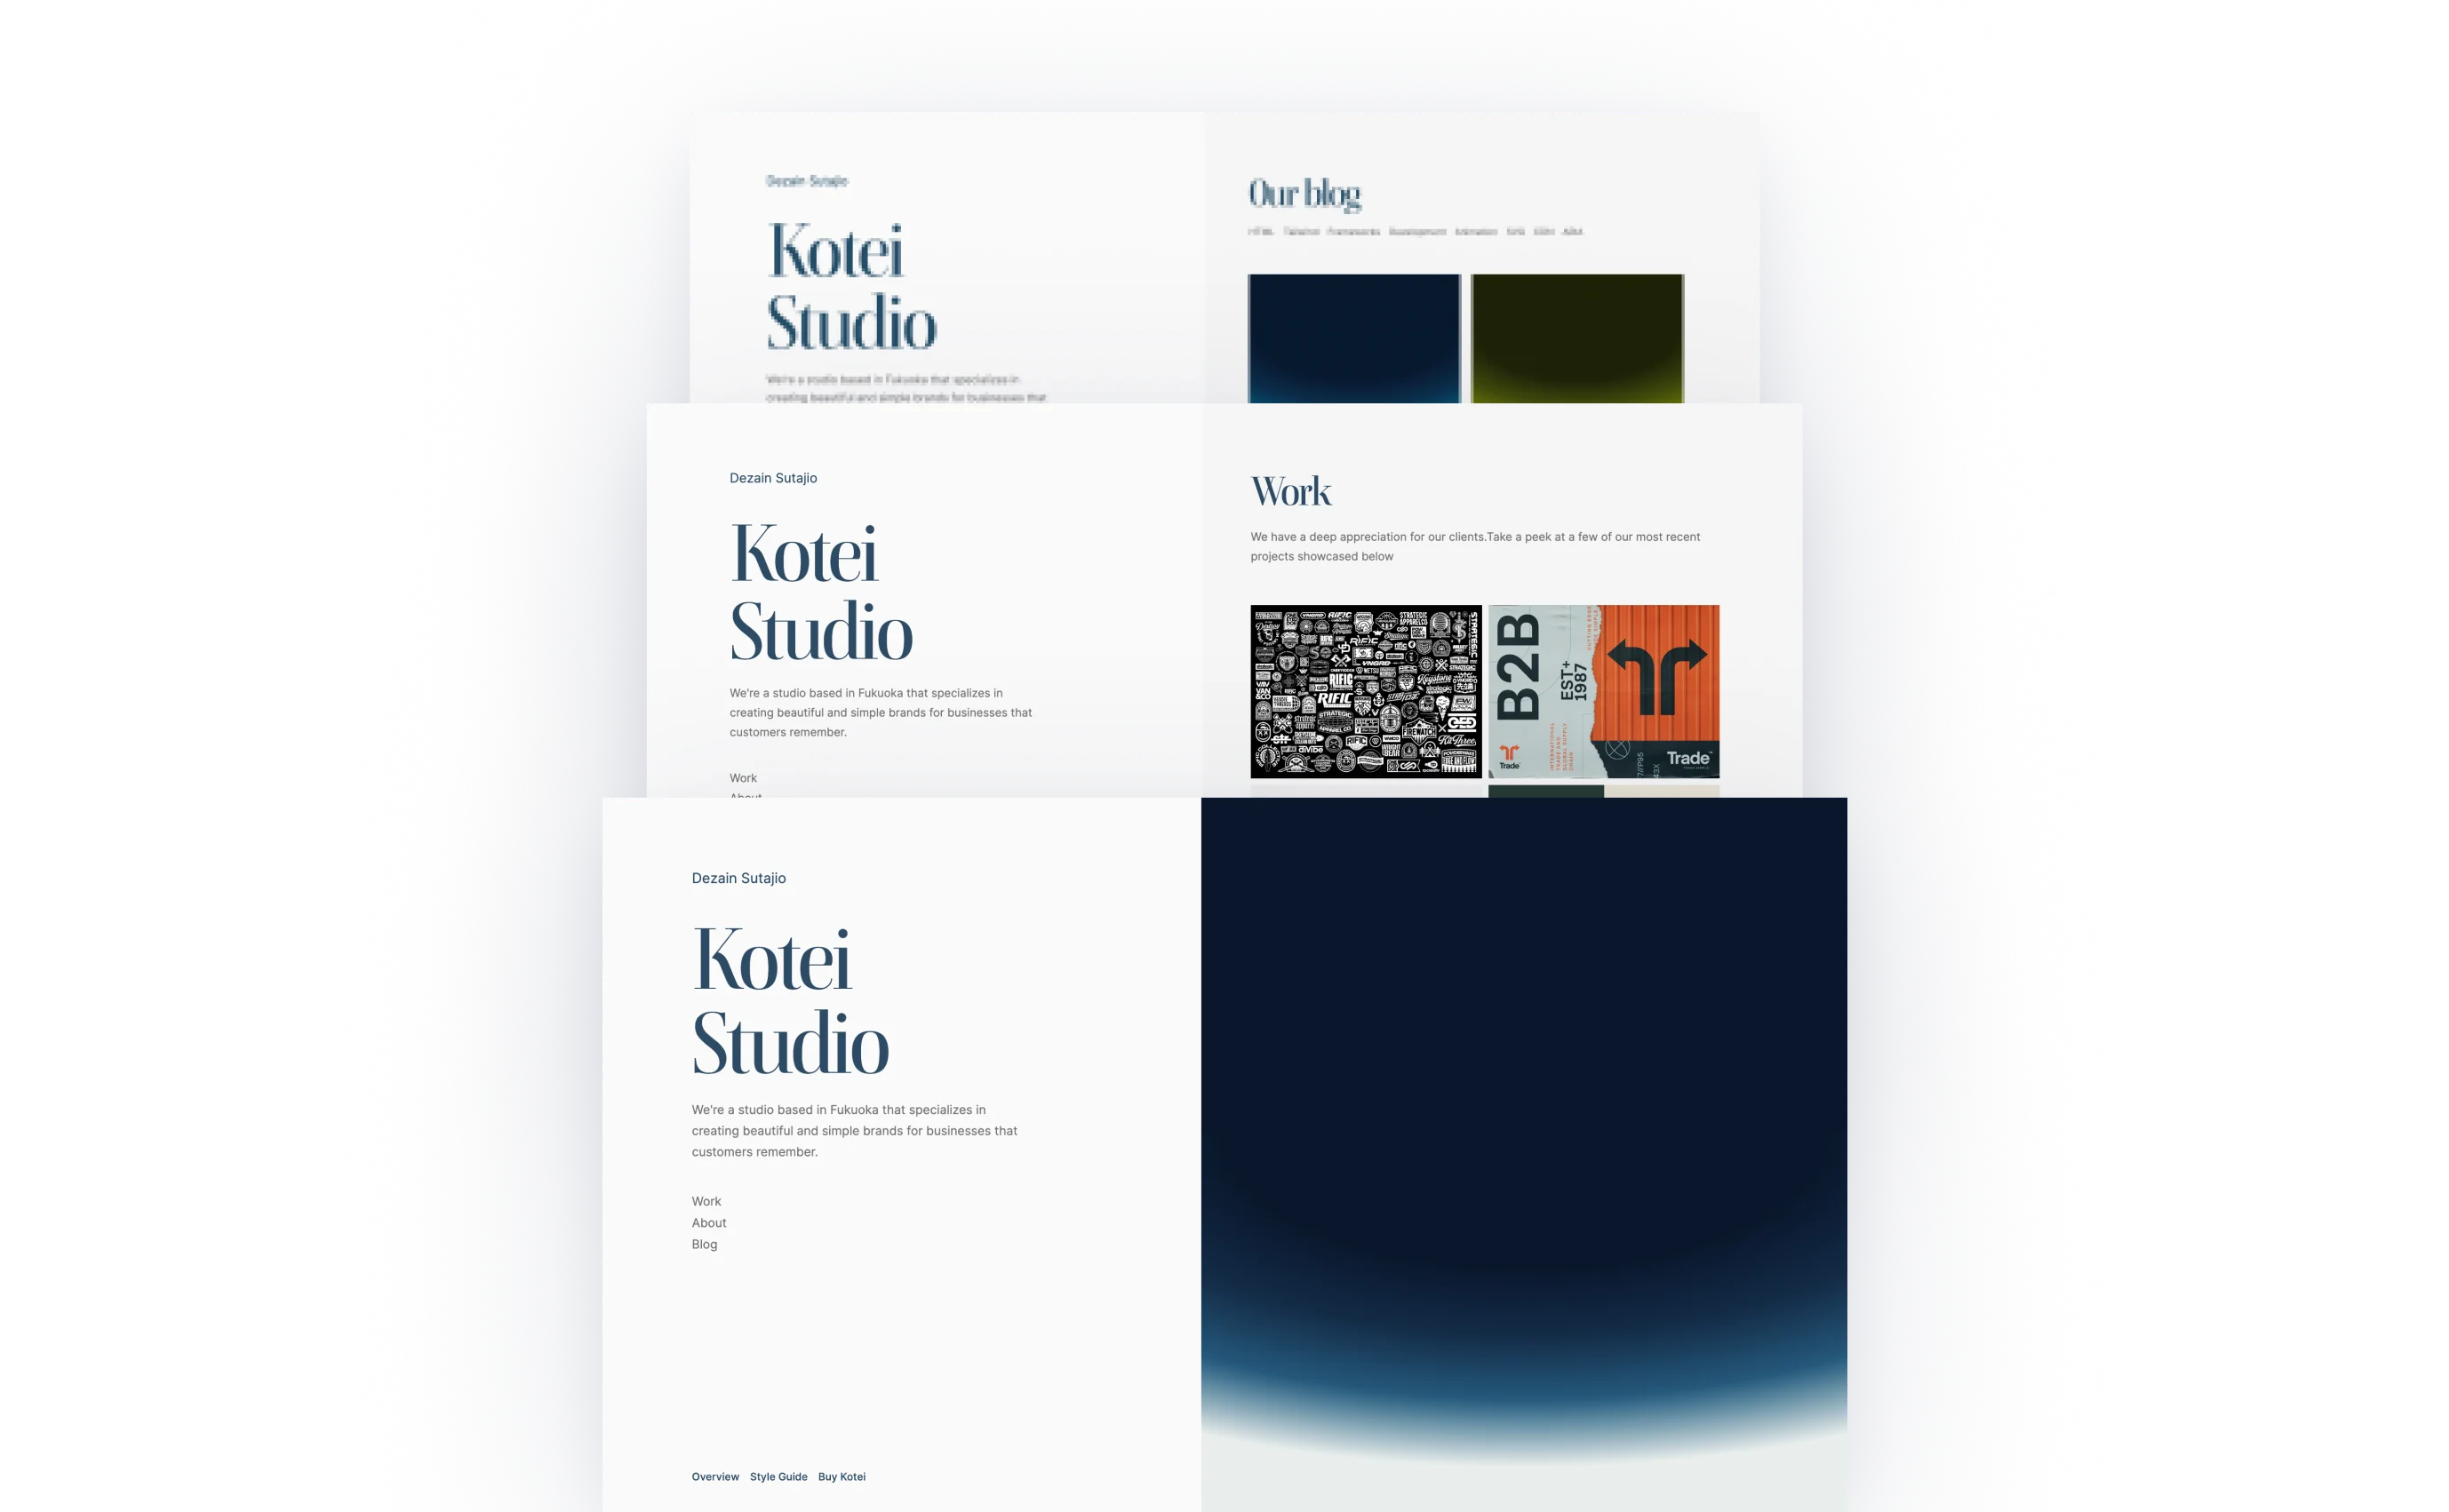 Kotei Studio's clean website design with a minimalist aesthetic, featuring a monochromatic color scheme punctuated by blue accents. The layout includes sections for the studio's philosophy, portfolio of work, and a blog, aimed at highlighting their expertise in creating memorable brands.